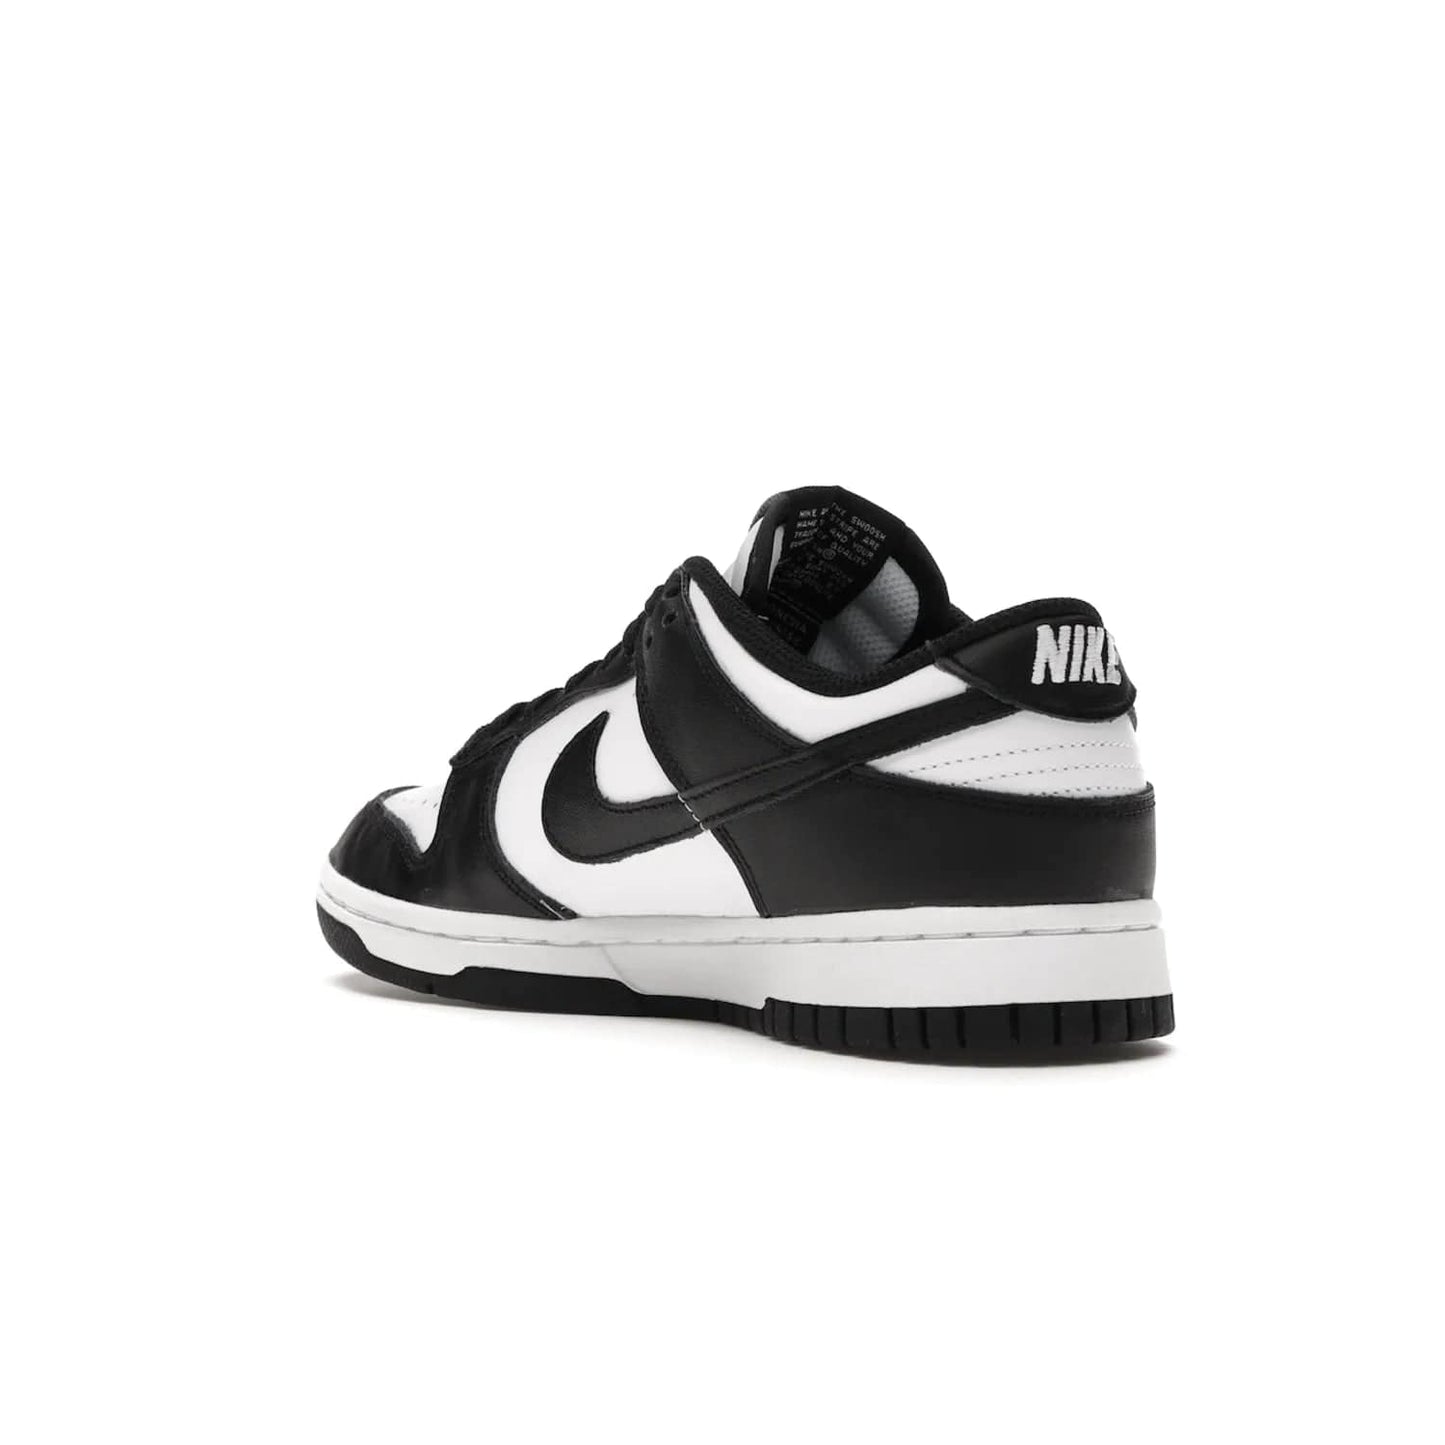 Nike Dunk Low Retro White Black Panda (2021) (Women's) - Image 24 - Only at www.BallersClubKickz.com - Say hello to the new Nike Dunk Low Retro White Black Panda (2021) (Women's)! White & black leather upper with Nike Swoosh logo. Get your pair for $100 in March 2021! Shop now!